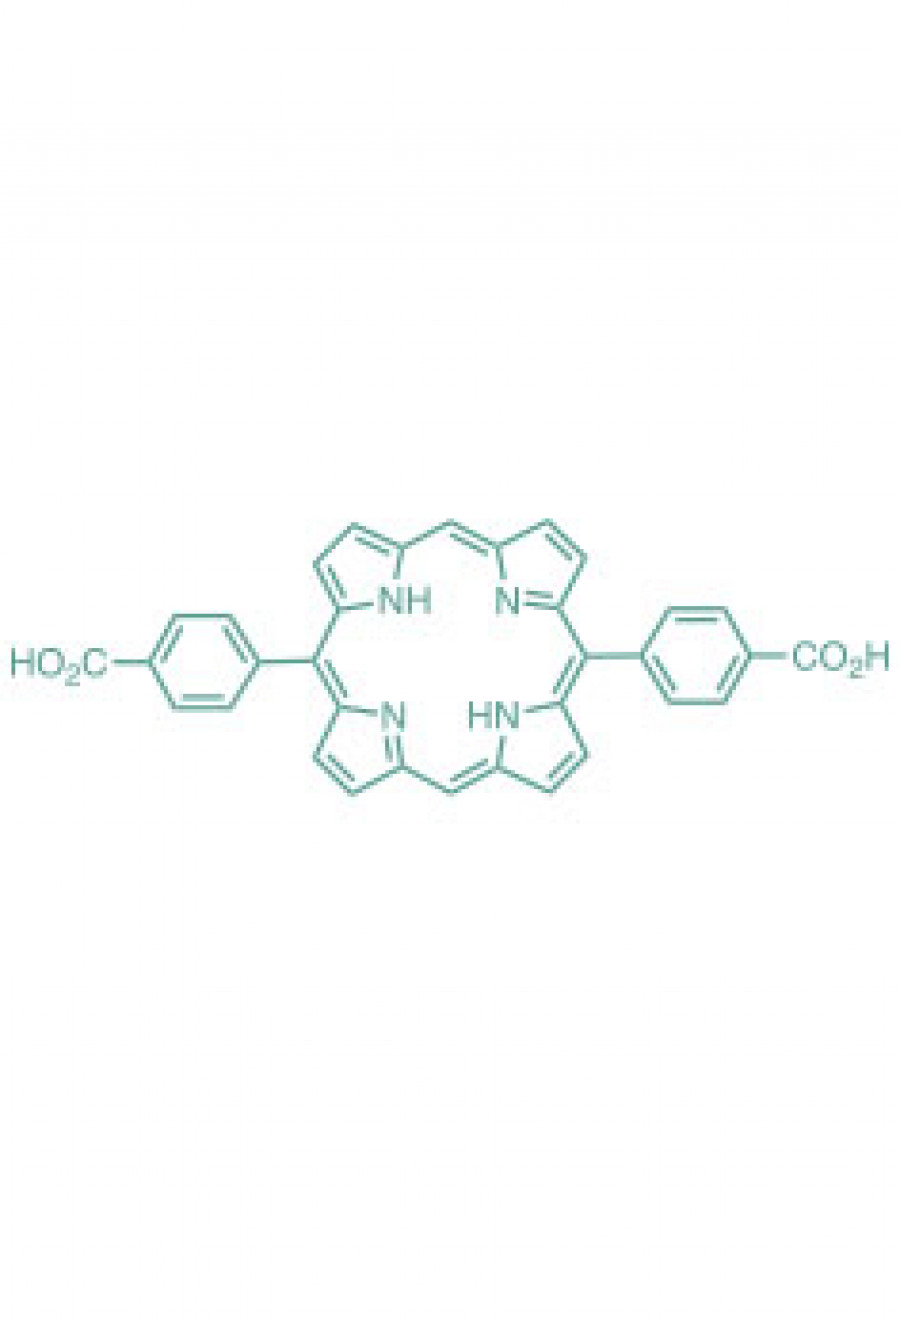 5,15-(di-4-carboxyphenyl)porphyrin  | Porphychem Expert porphyrin synthesis for research & industry